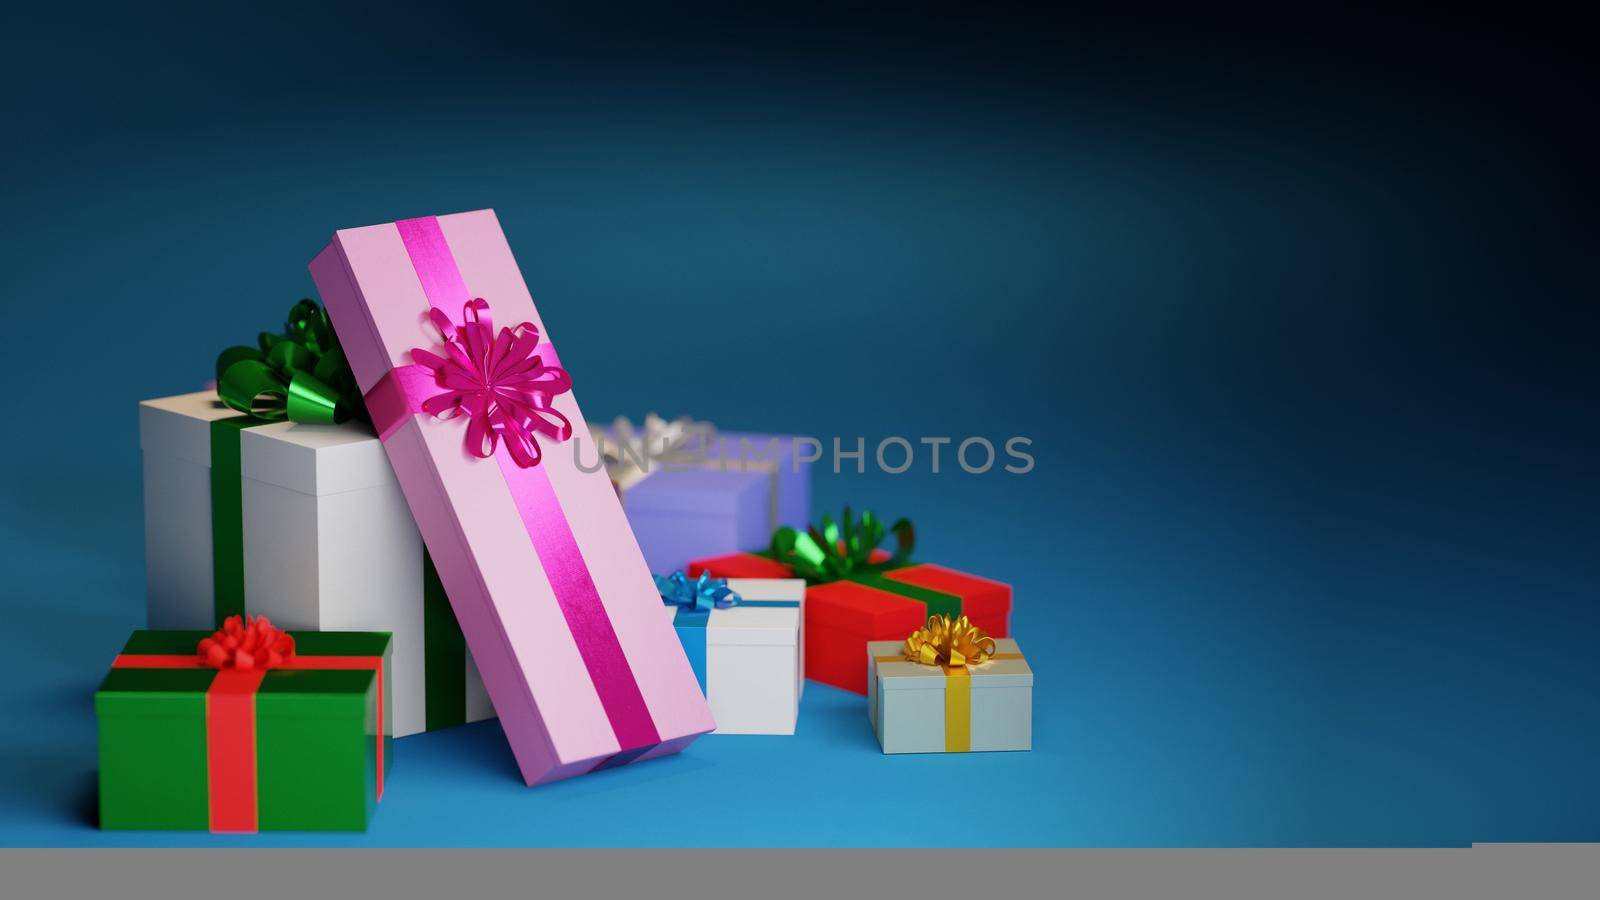 Christmas, birthday gift concept. Several gift boxes on blue background. Digital 3D render. by hernan_hyper